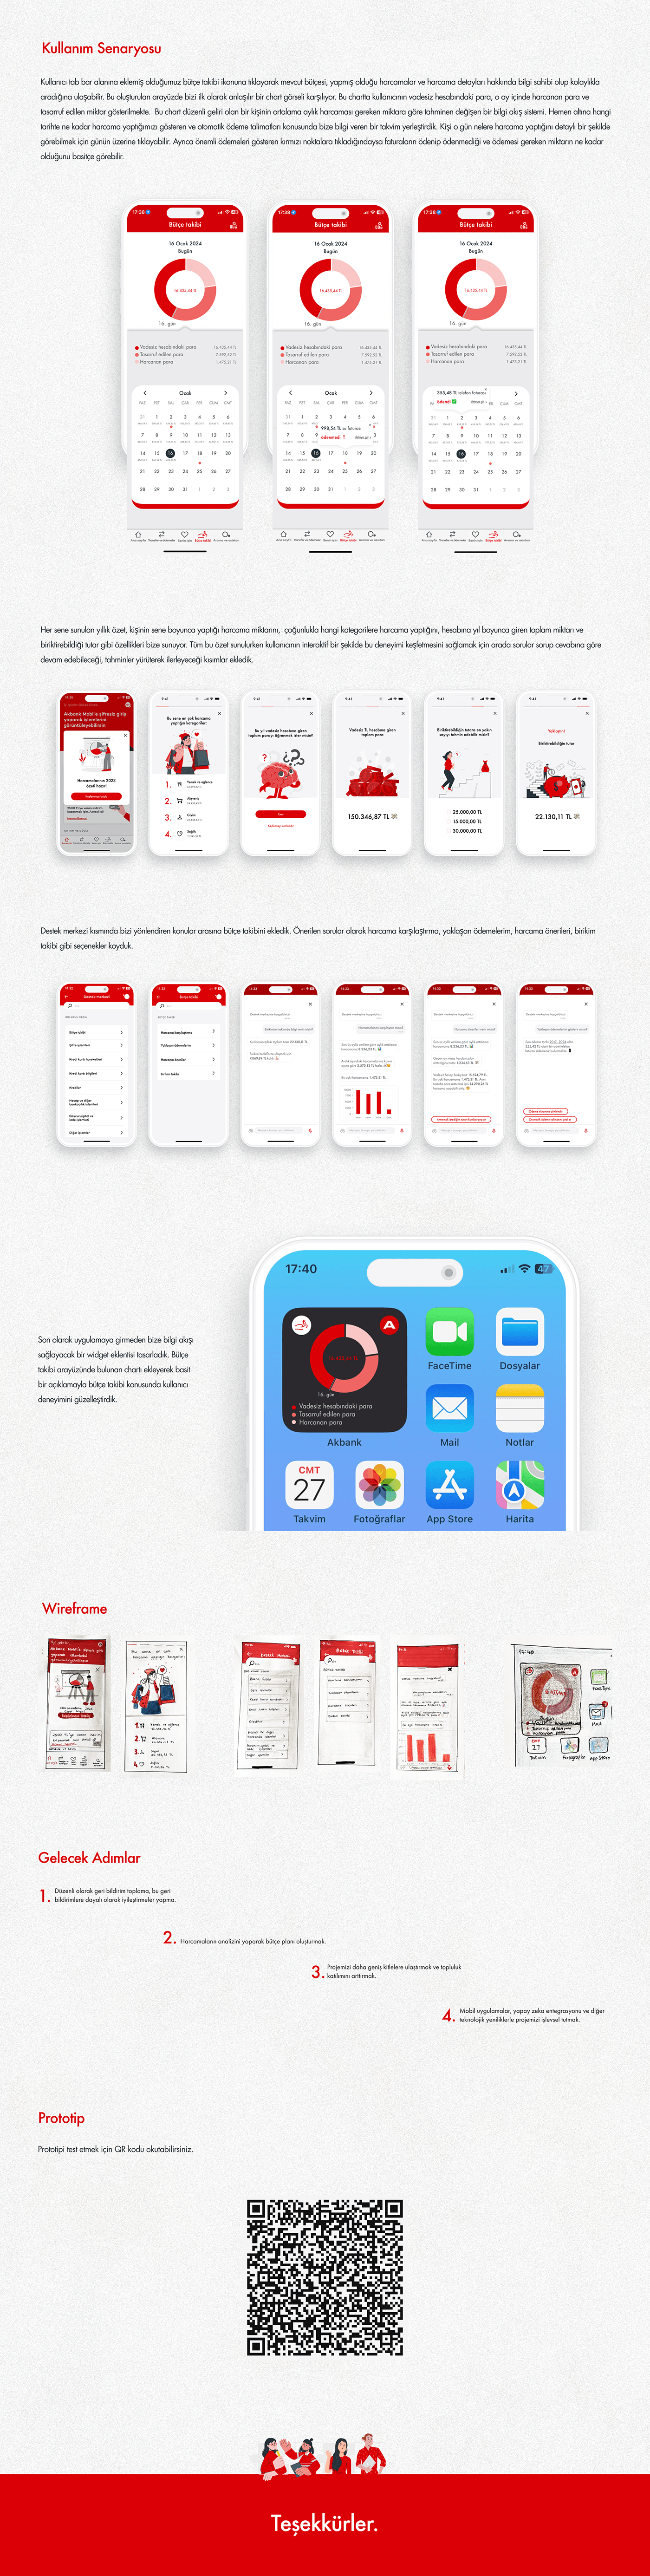 Akbank UI/UX ux design thinking user experience Figma user interface app design Case Study userspots